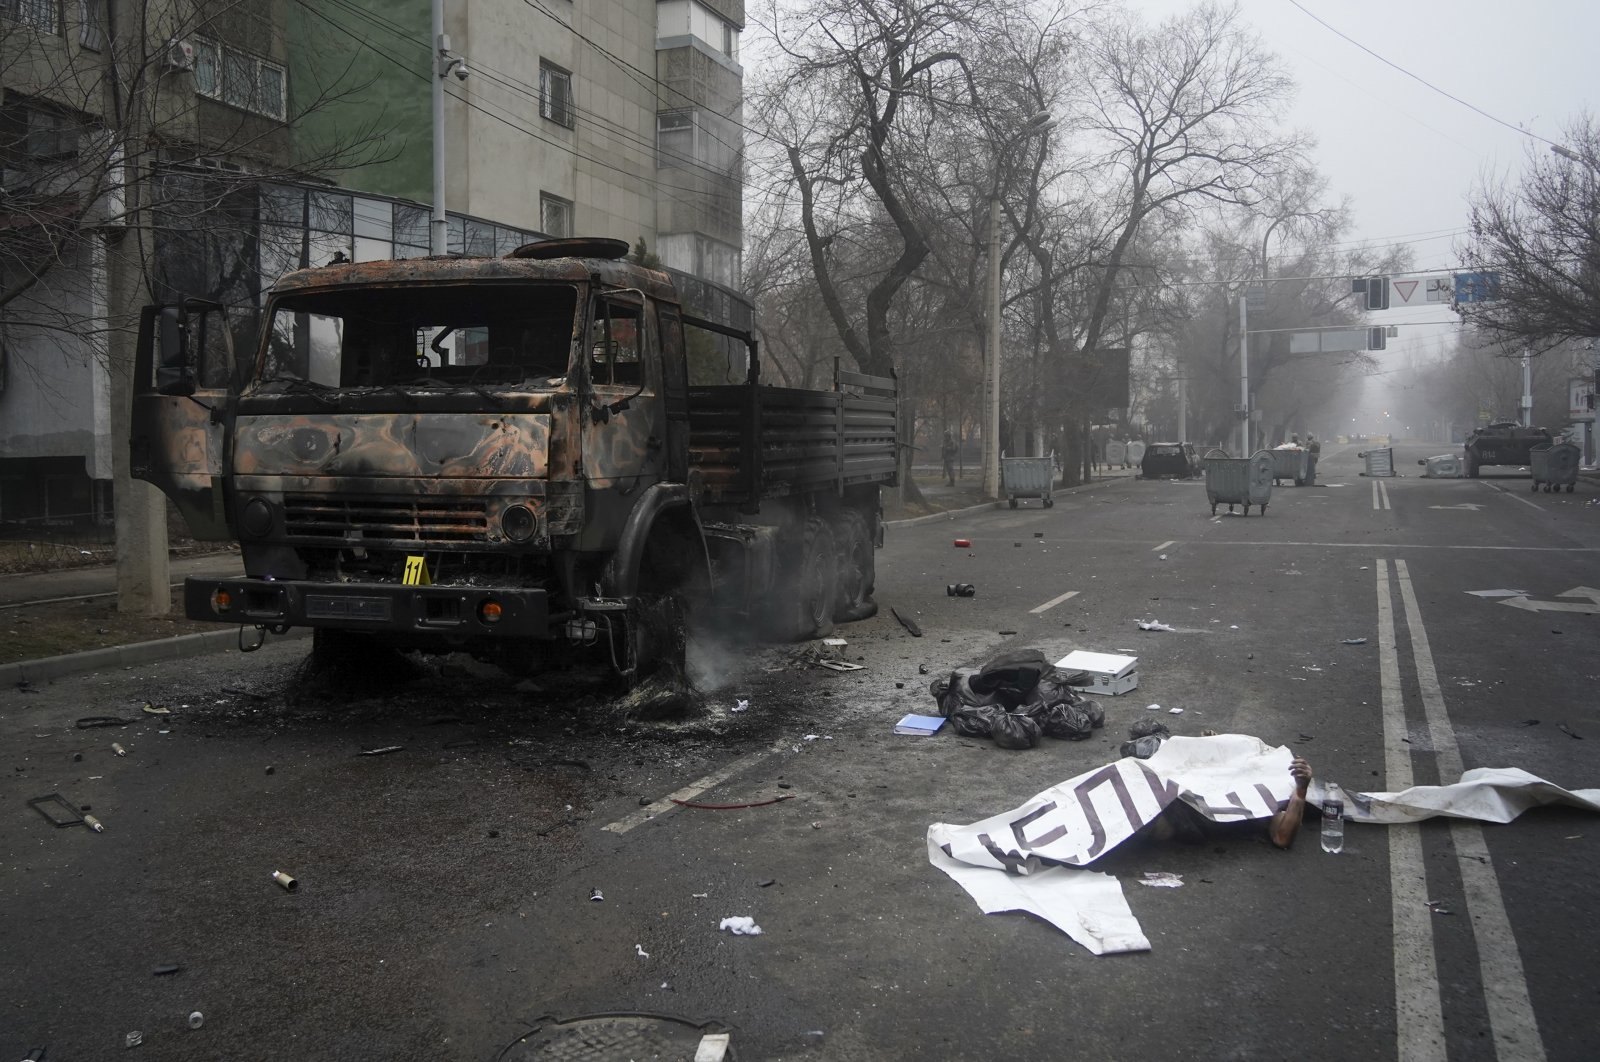 A body of a victim covered by a banner, (R), lays near a military truck, which was burned after clashes, in Almaty, Kazakhstan, Jan. 6, 2022. (AP Photo)